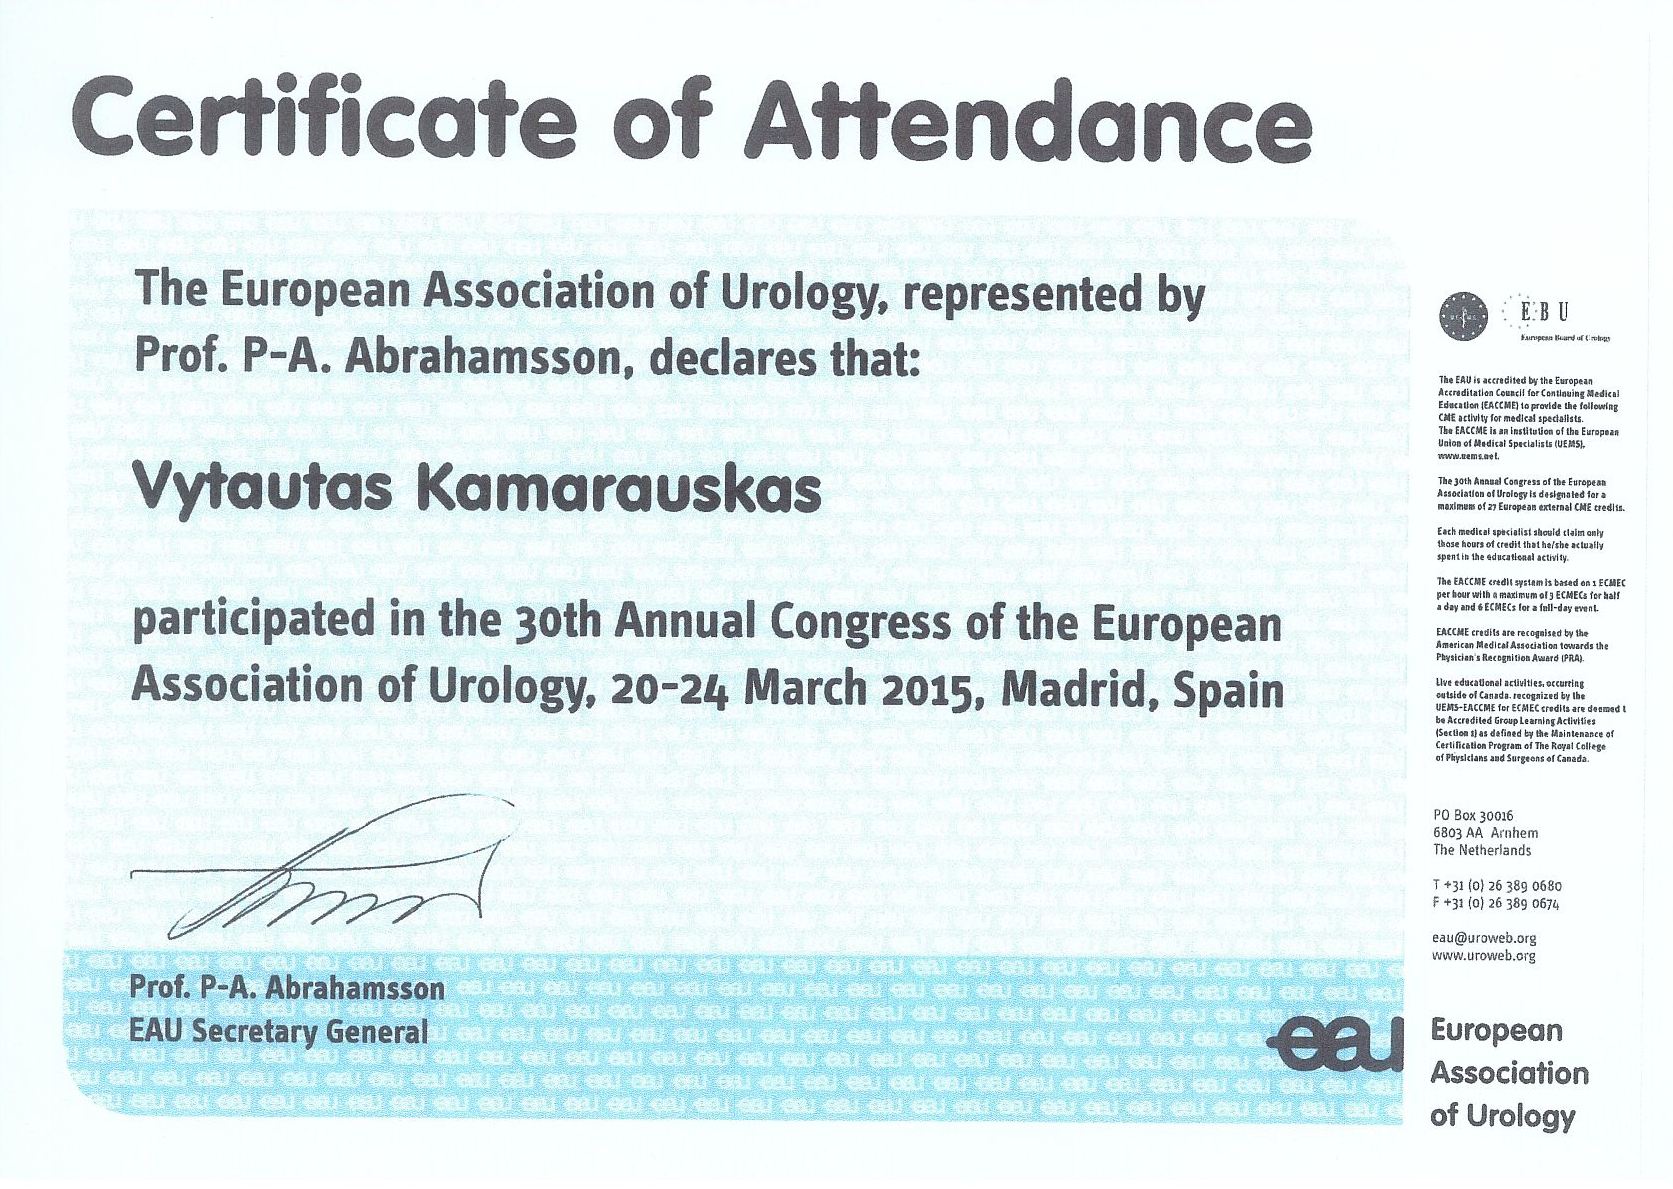 30th Annual Congress of the European Association of Urology, 20-24 March 2015, Madrid, Spain